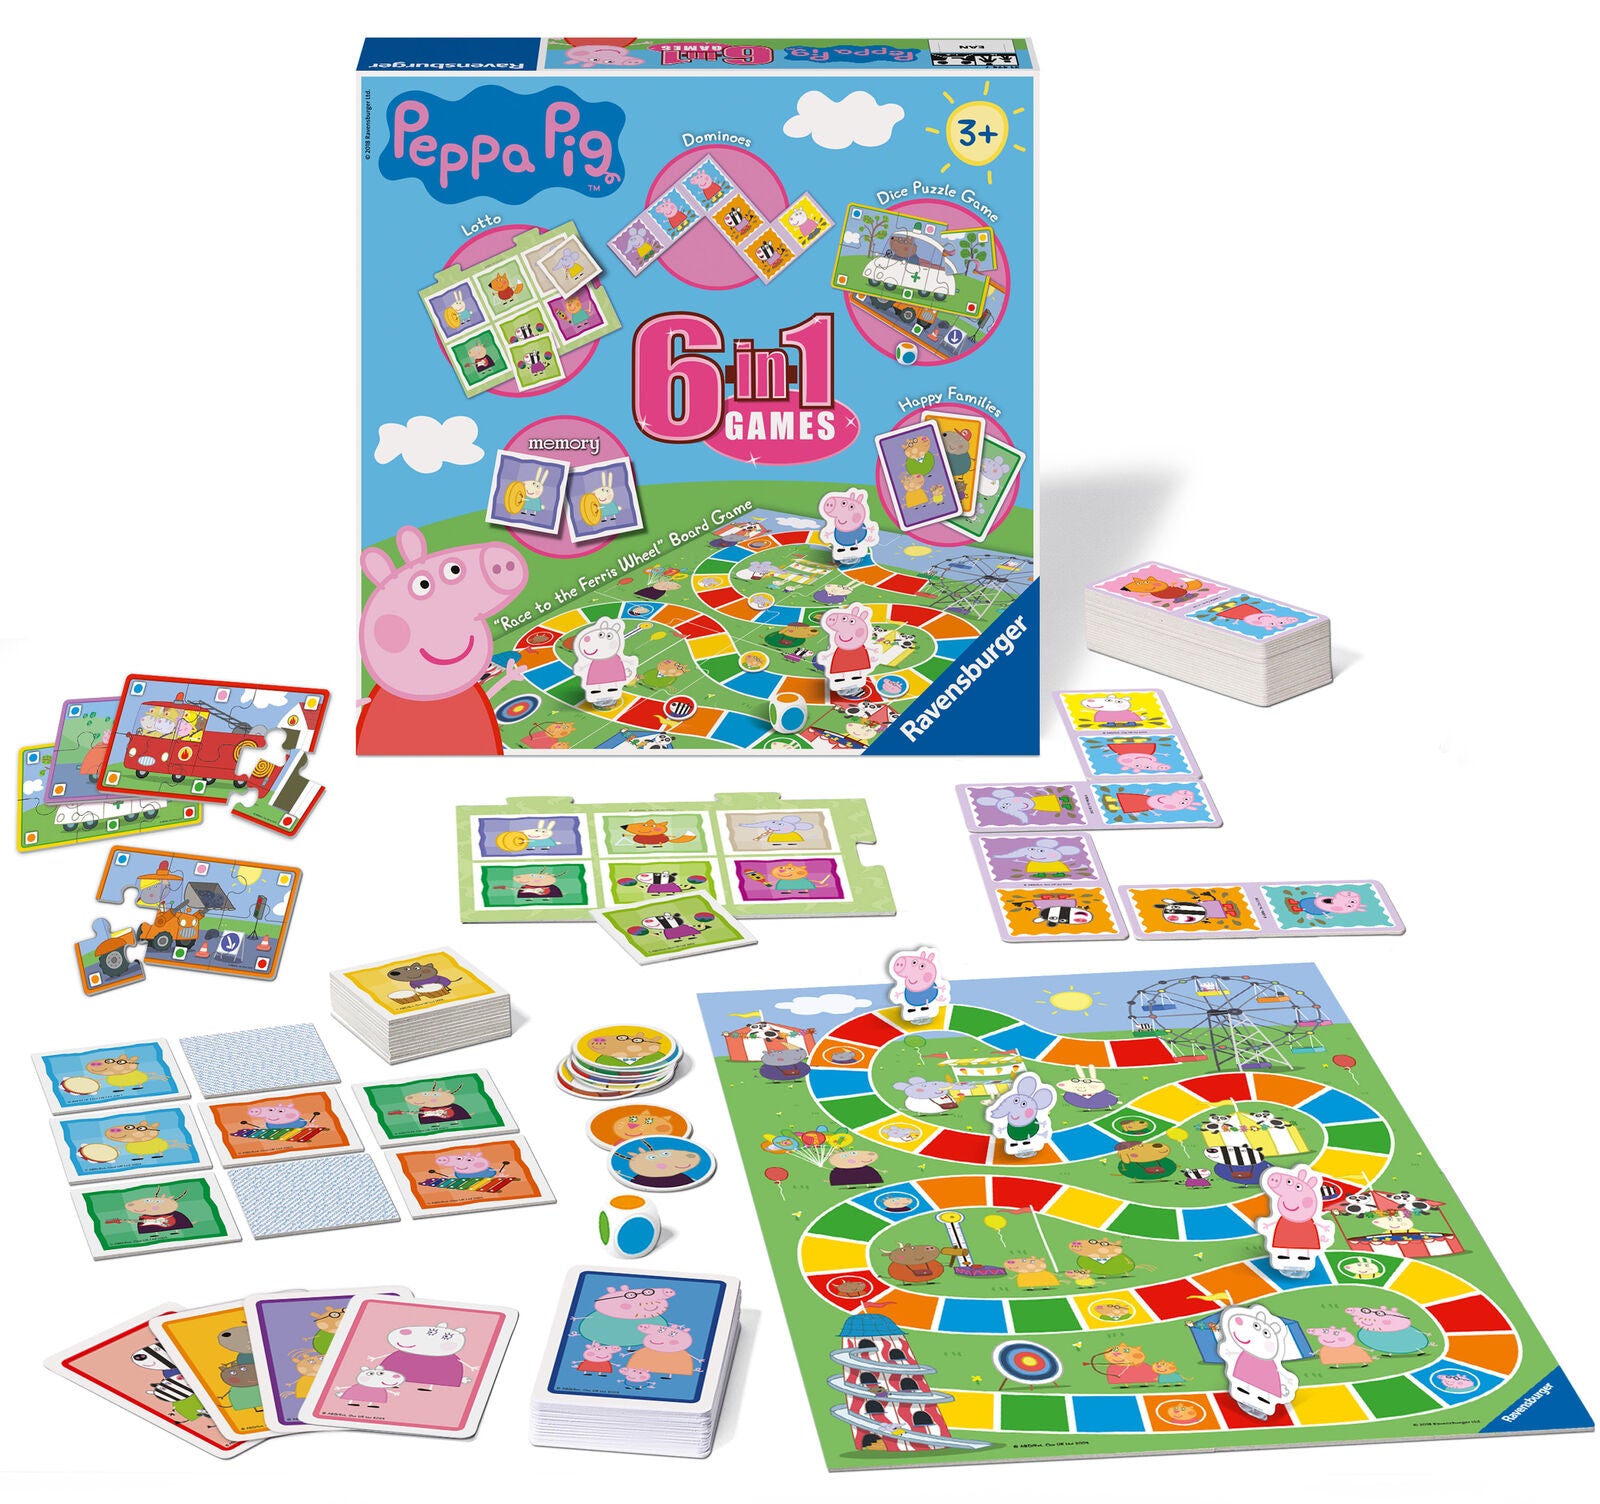 21375 Ravensburger Peppa Pig 6 in 1 Games Box Childrens Toys 104 Pieces Age 3+